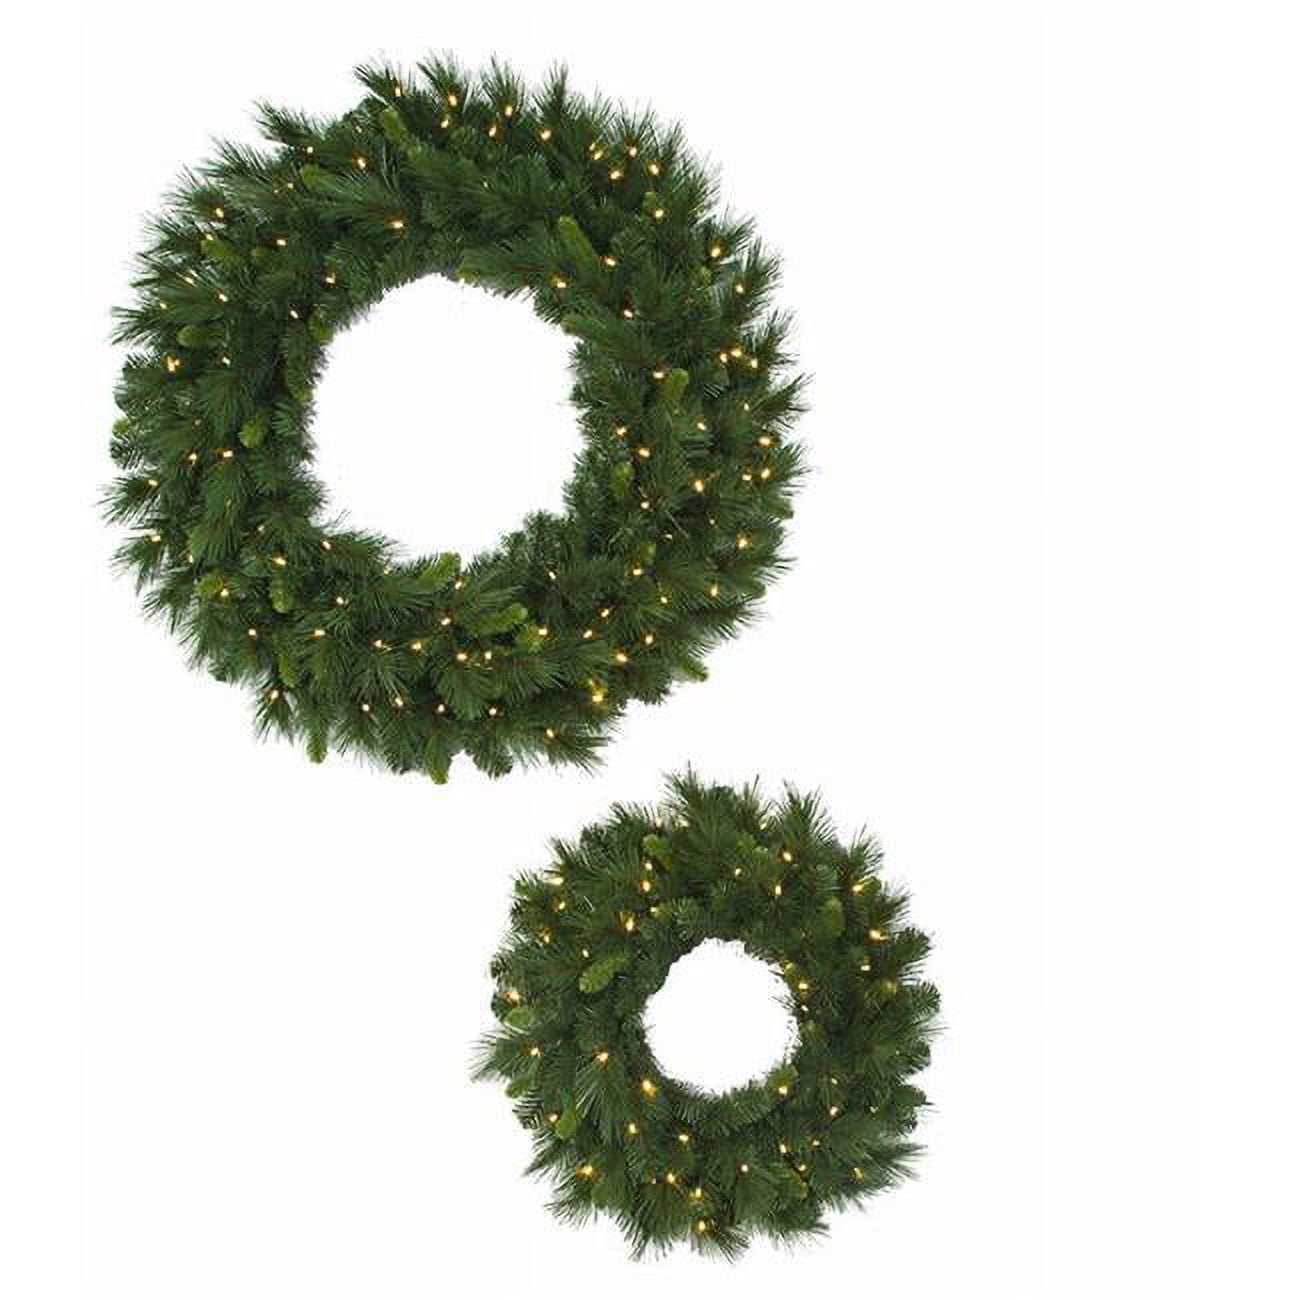 Picture of Autograph Foliages C-195514B 36 in. Battery Operated Led Artisan Mixed Pine Wreath